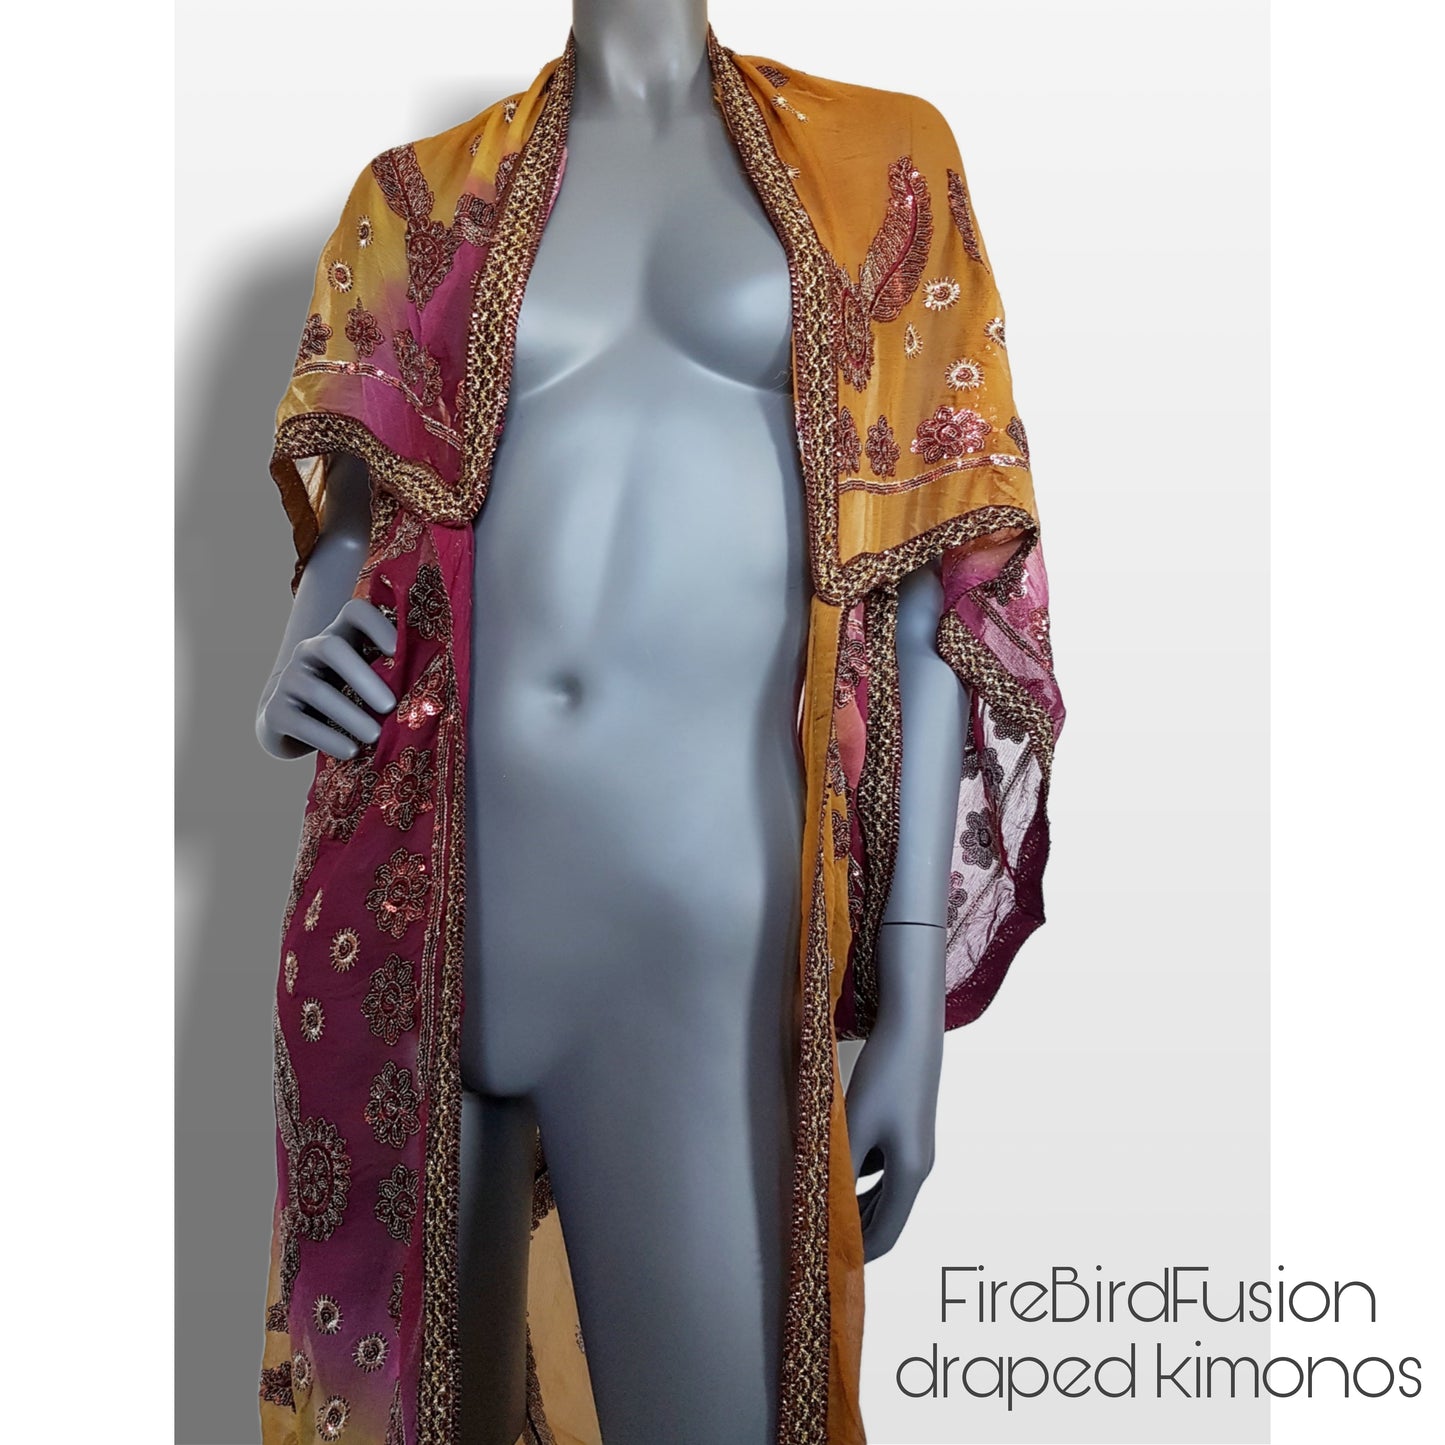 Draped kimono, mustard and bordeaux with elaborated embrodery in antique gold sequins and beads (M)